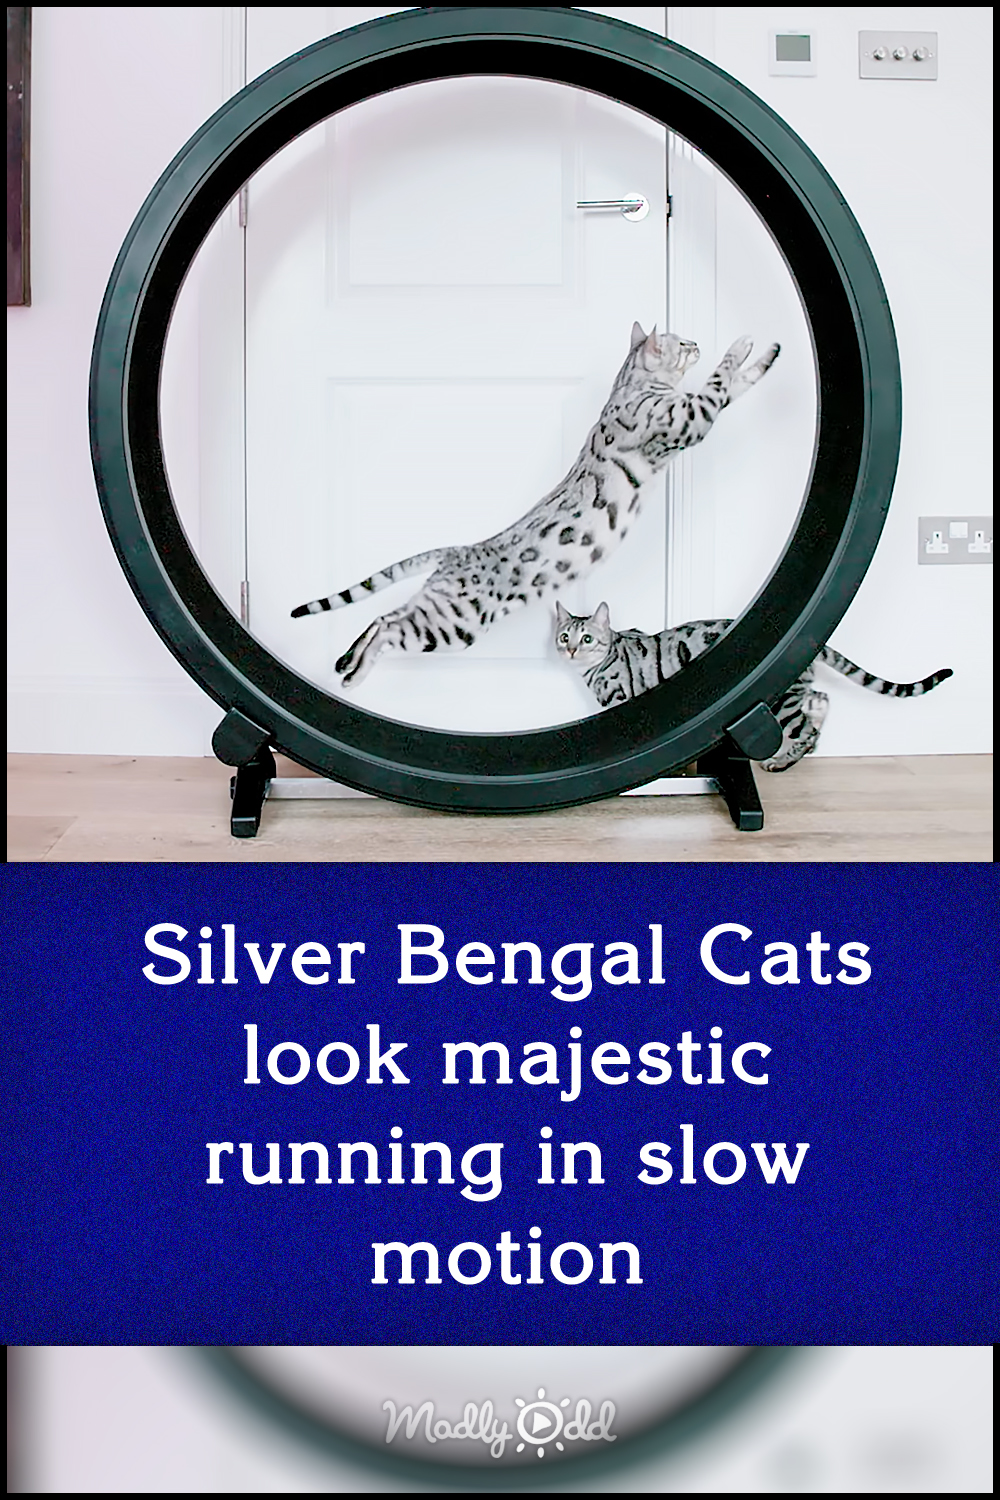 Silver Bengal Cats look majestic running in slow motion